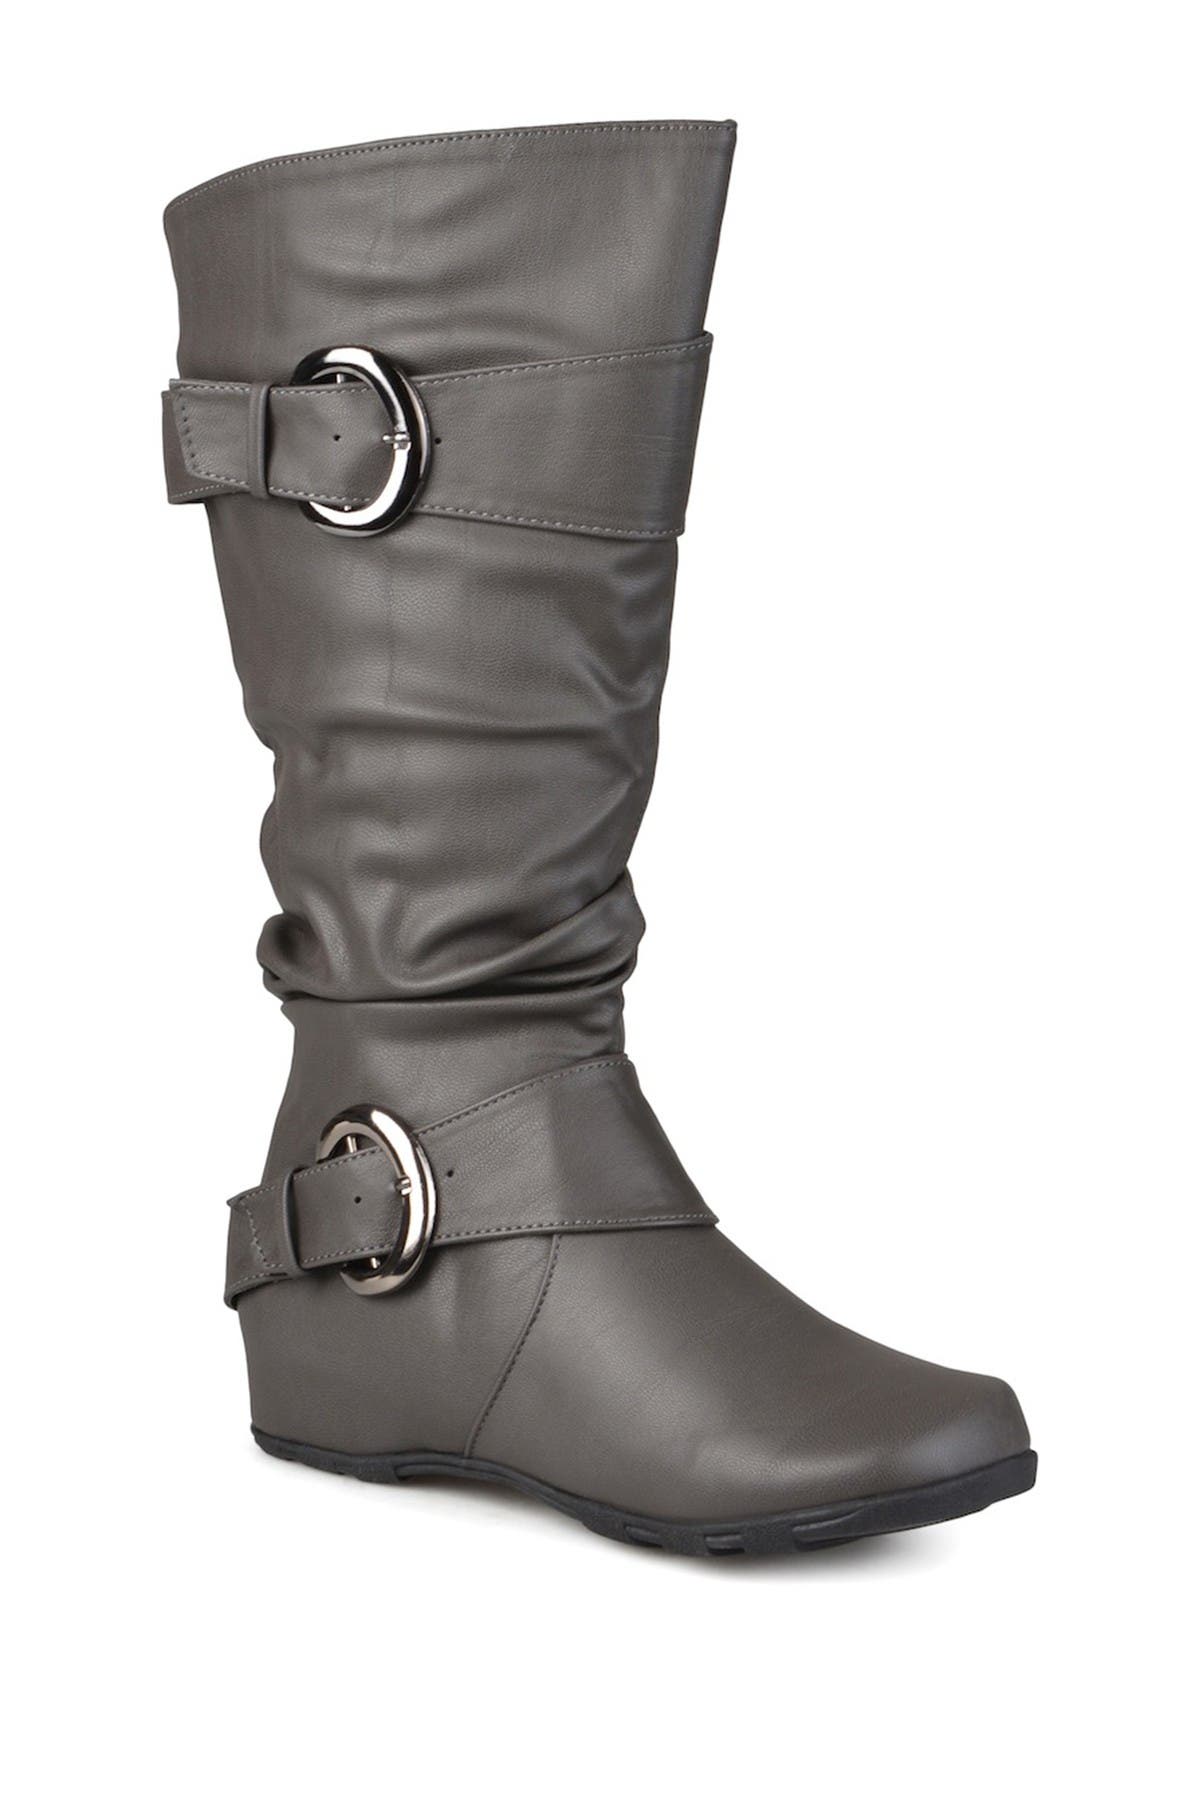 mid calf boots with buckles